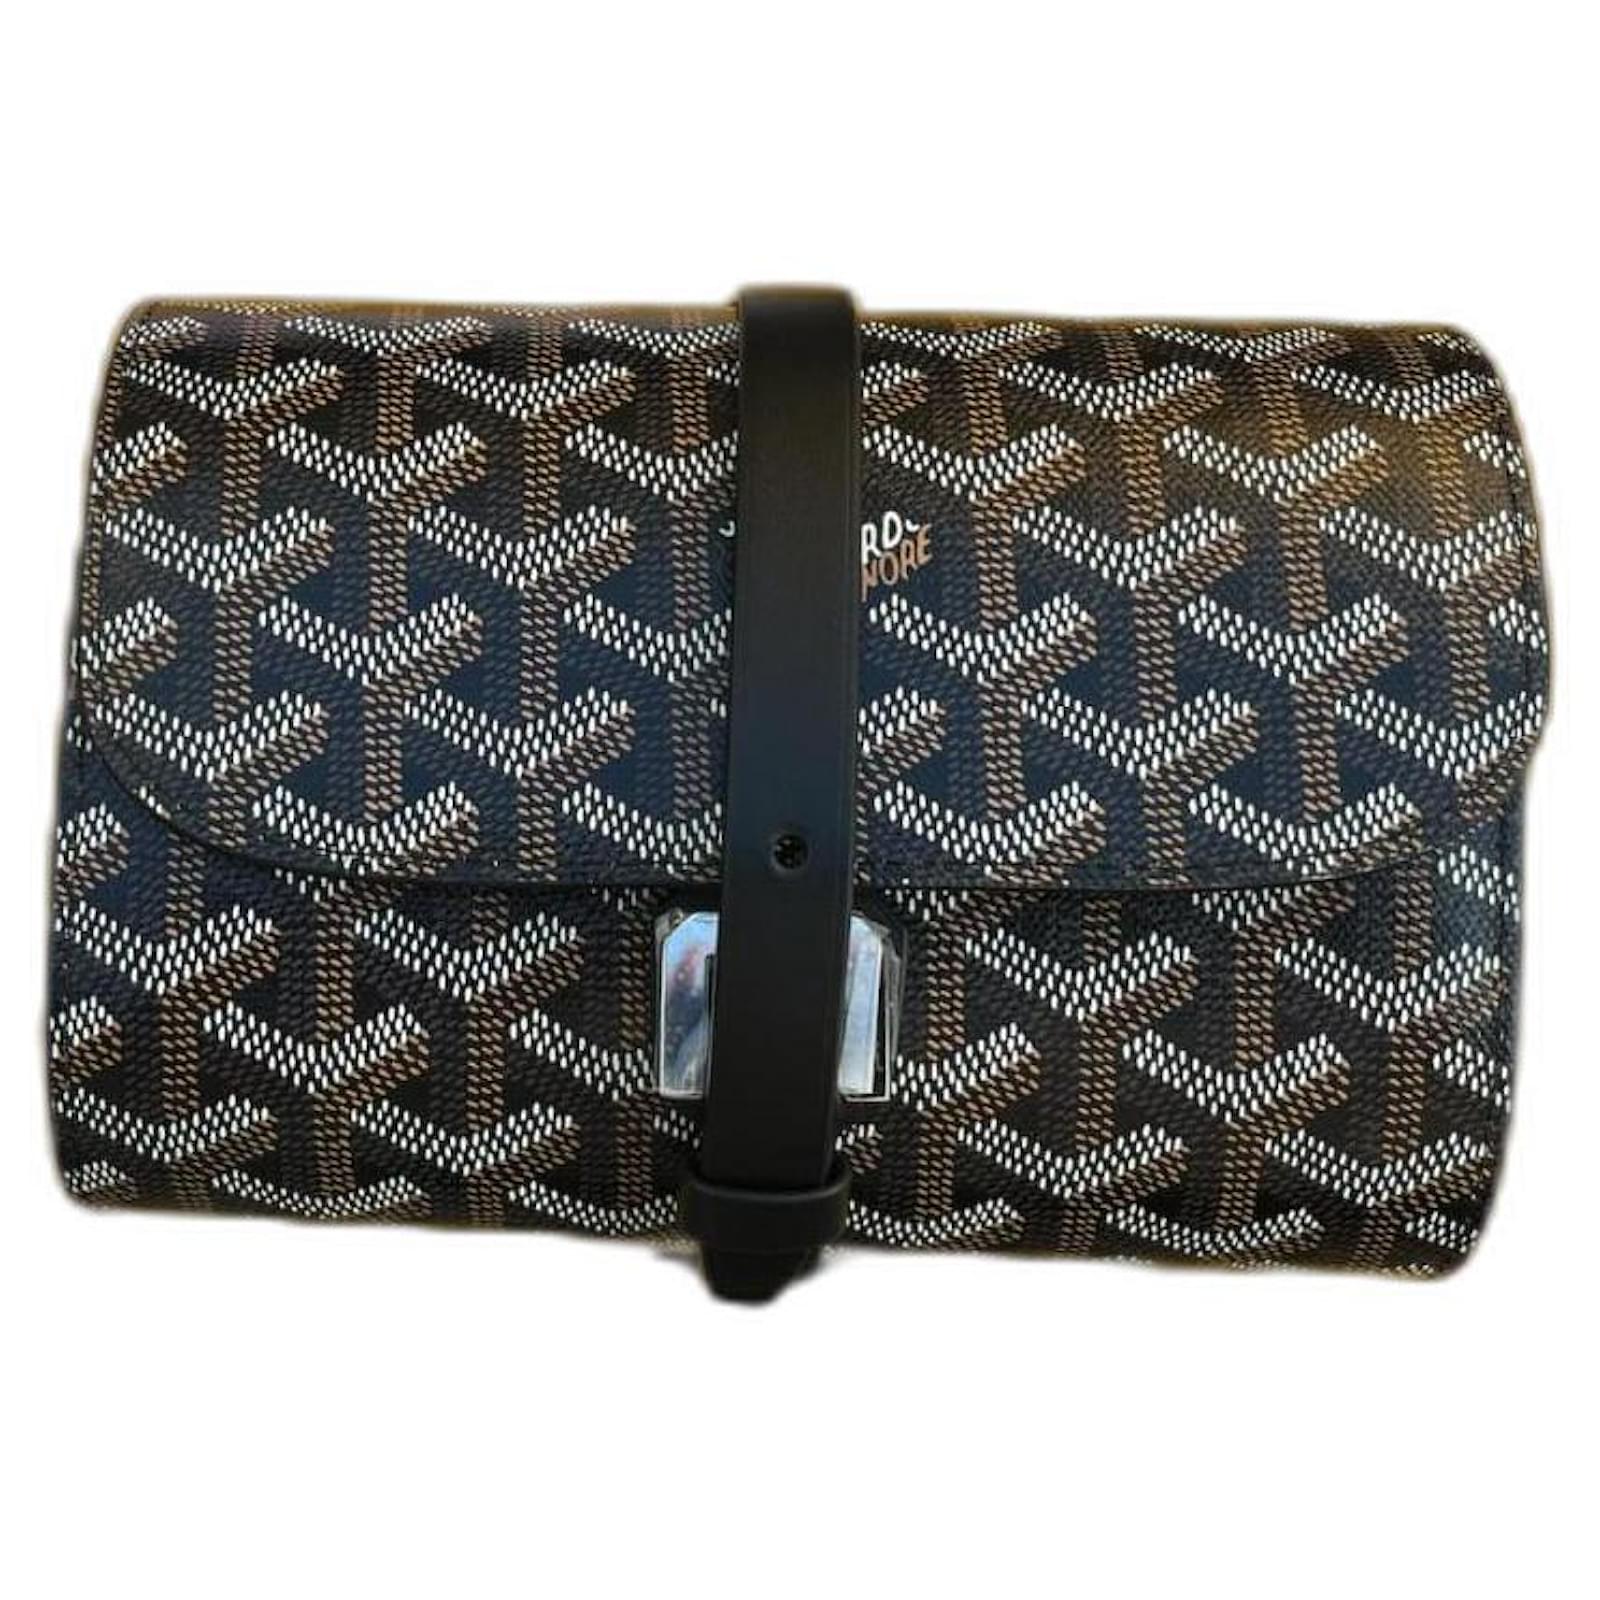 Trunk Chain Wallet Python Leather - Wallets and Small Leather